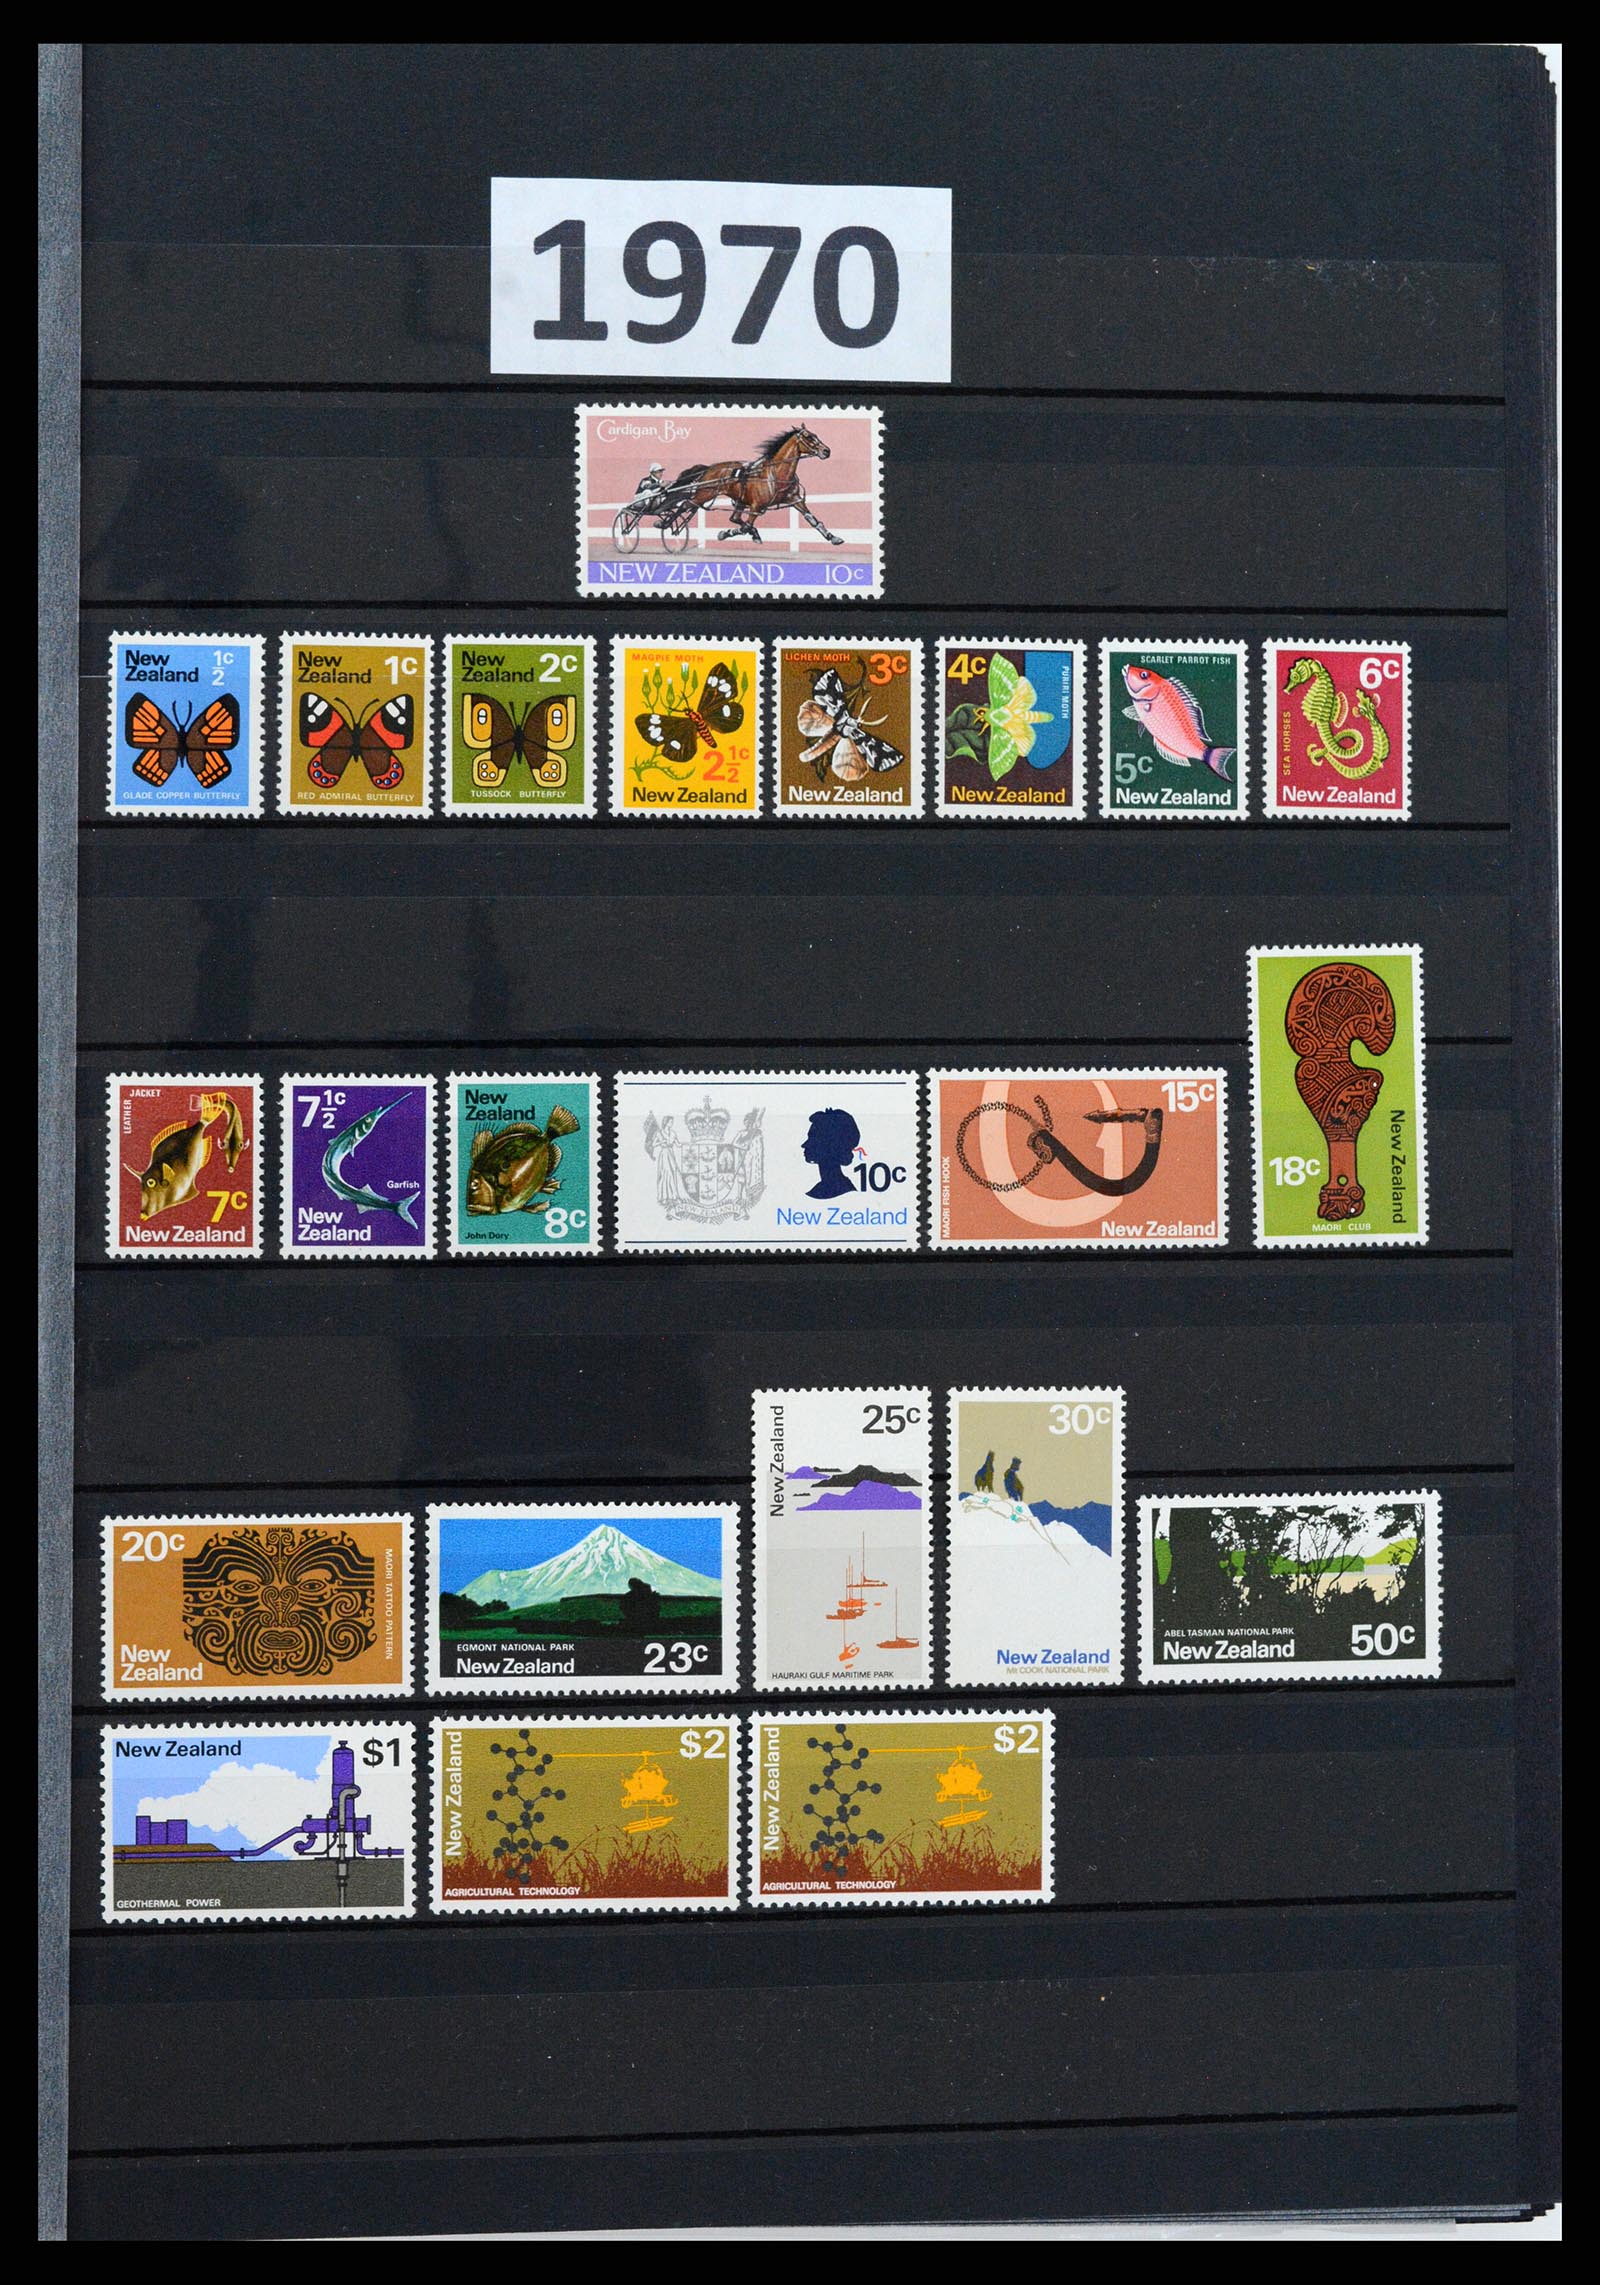 37597 001 - Stamp collection 37597 New Zealand 1970-2012.